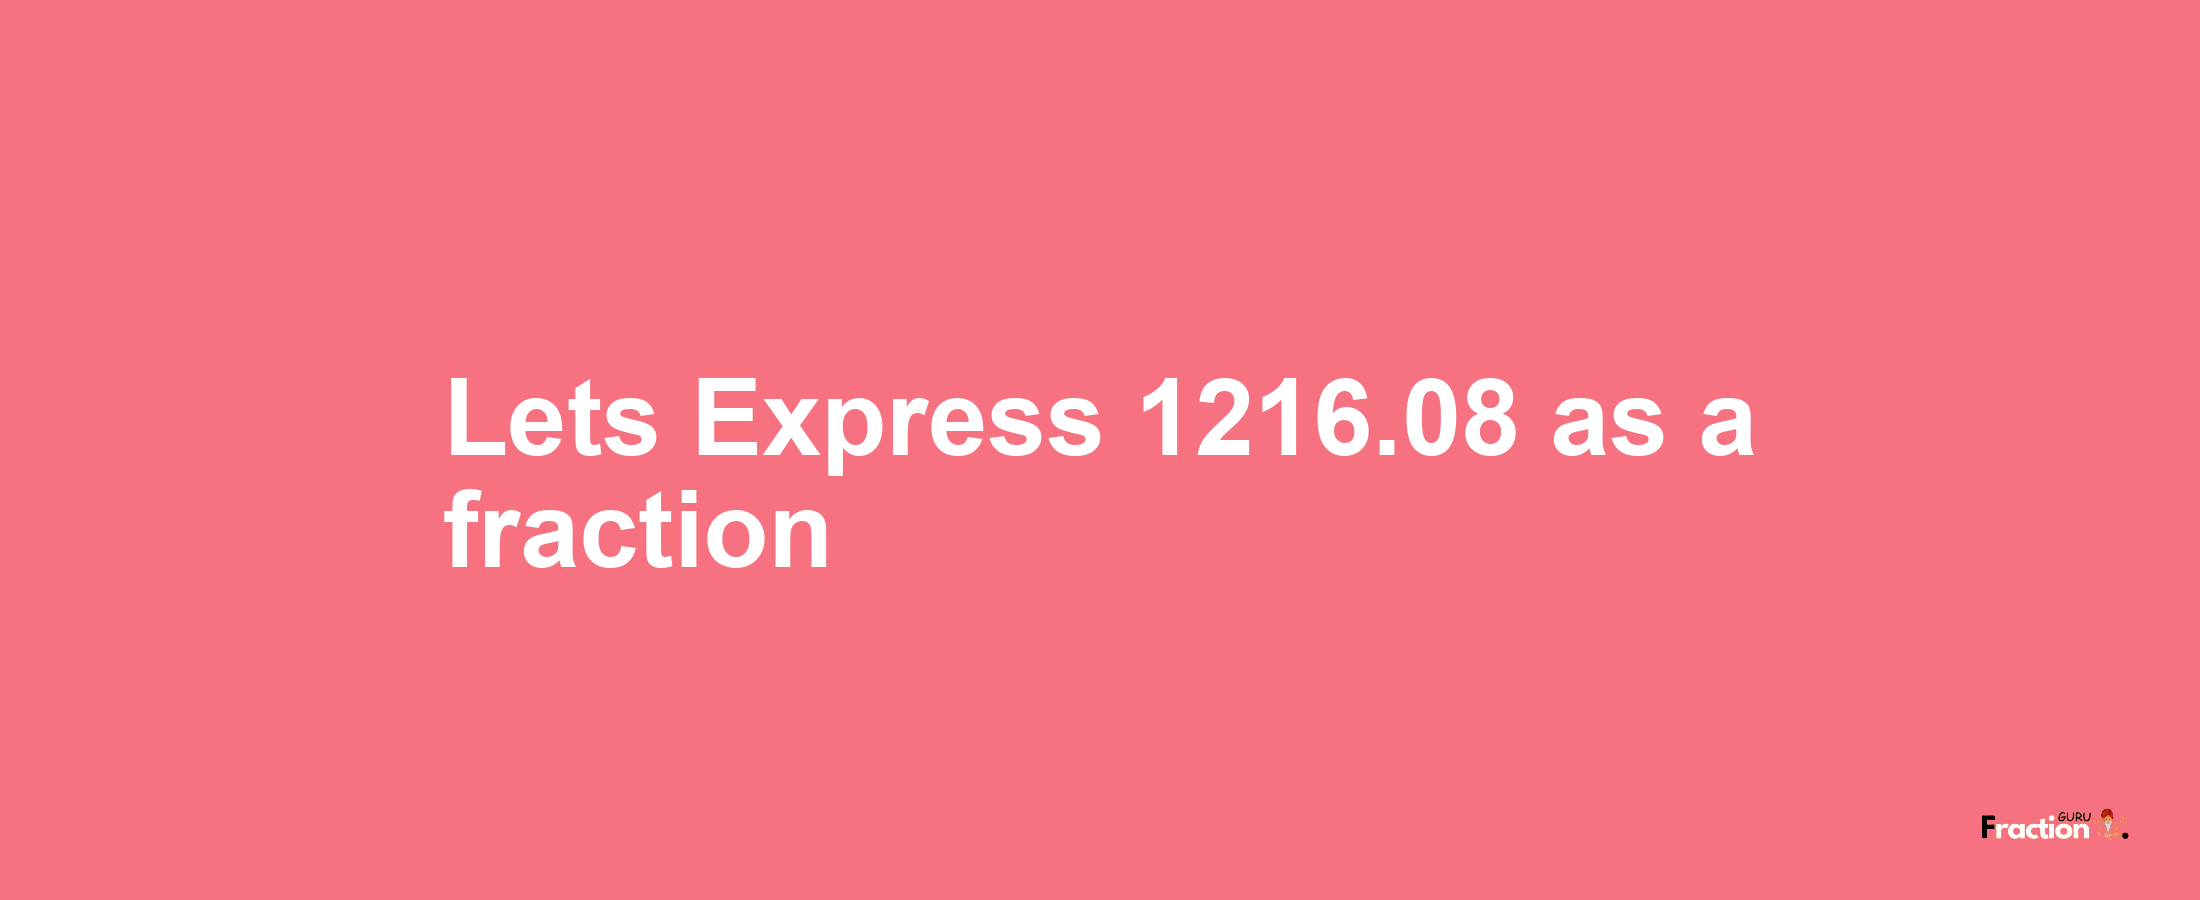 Lets Express 1216.08 as afraction